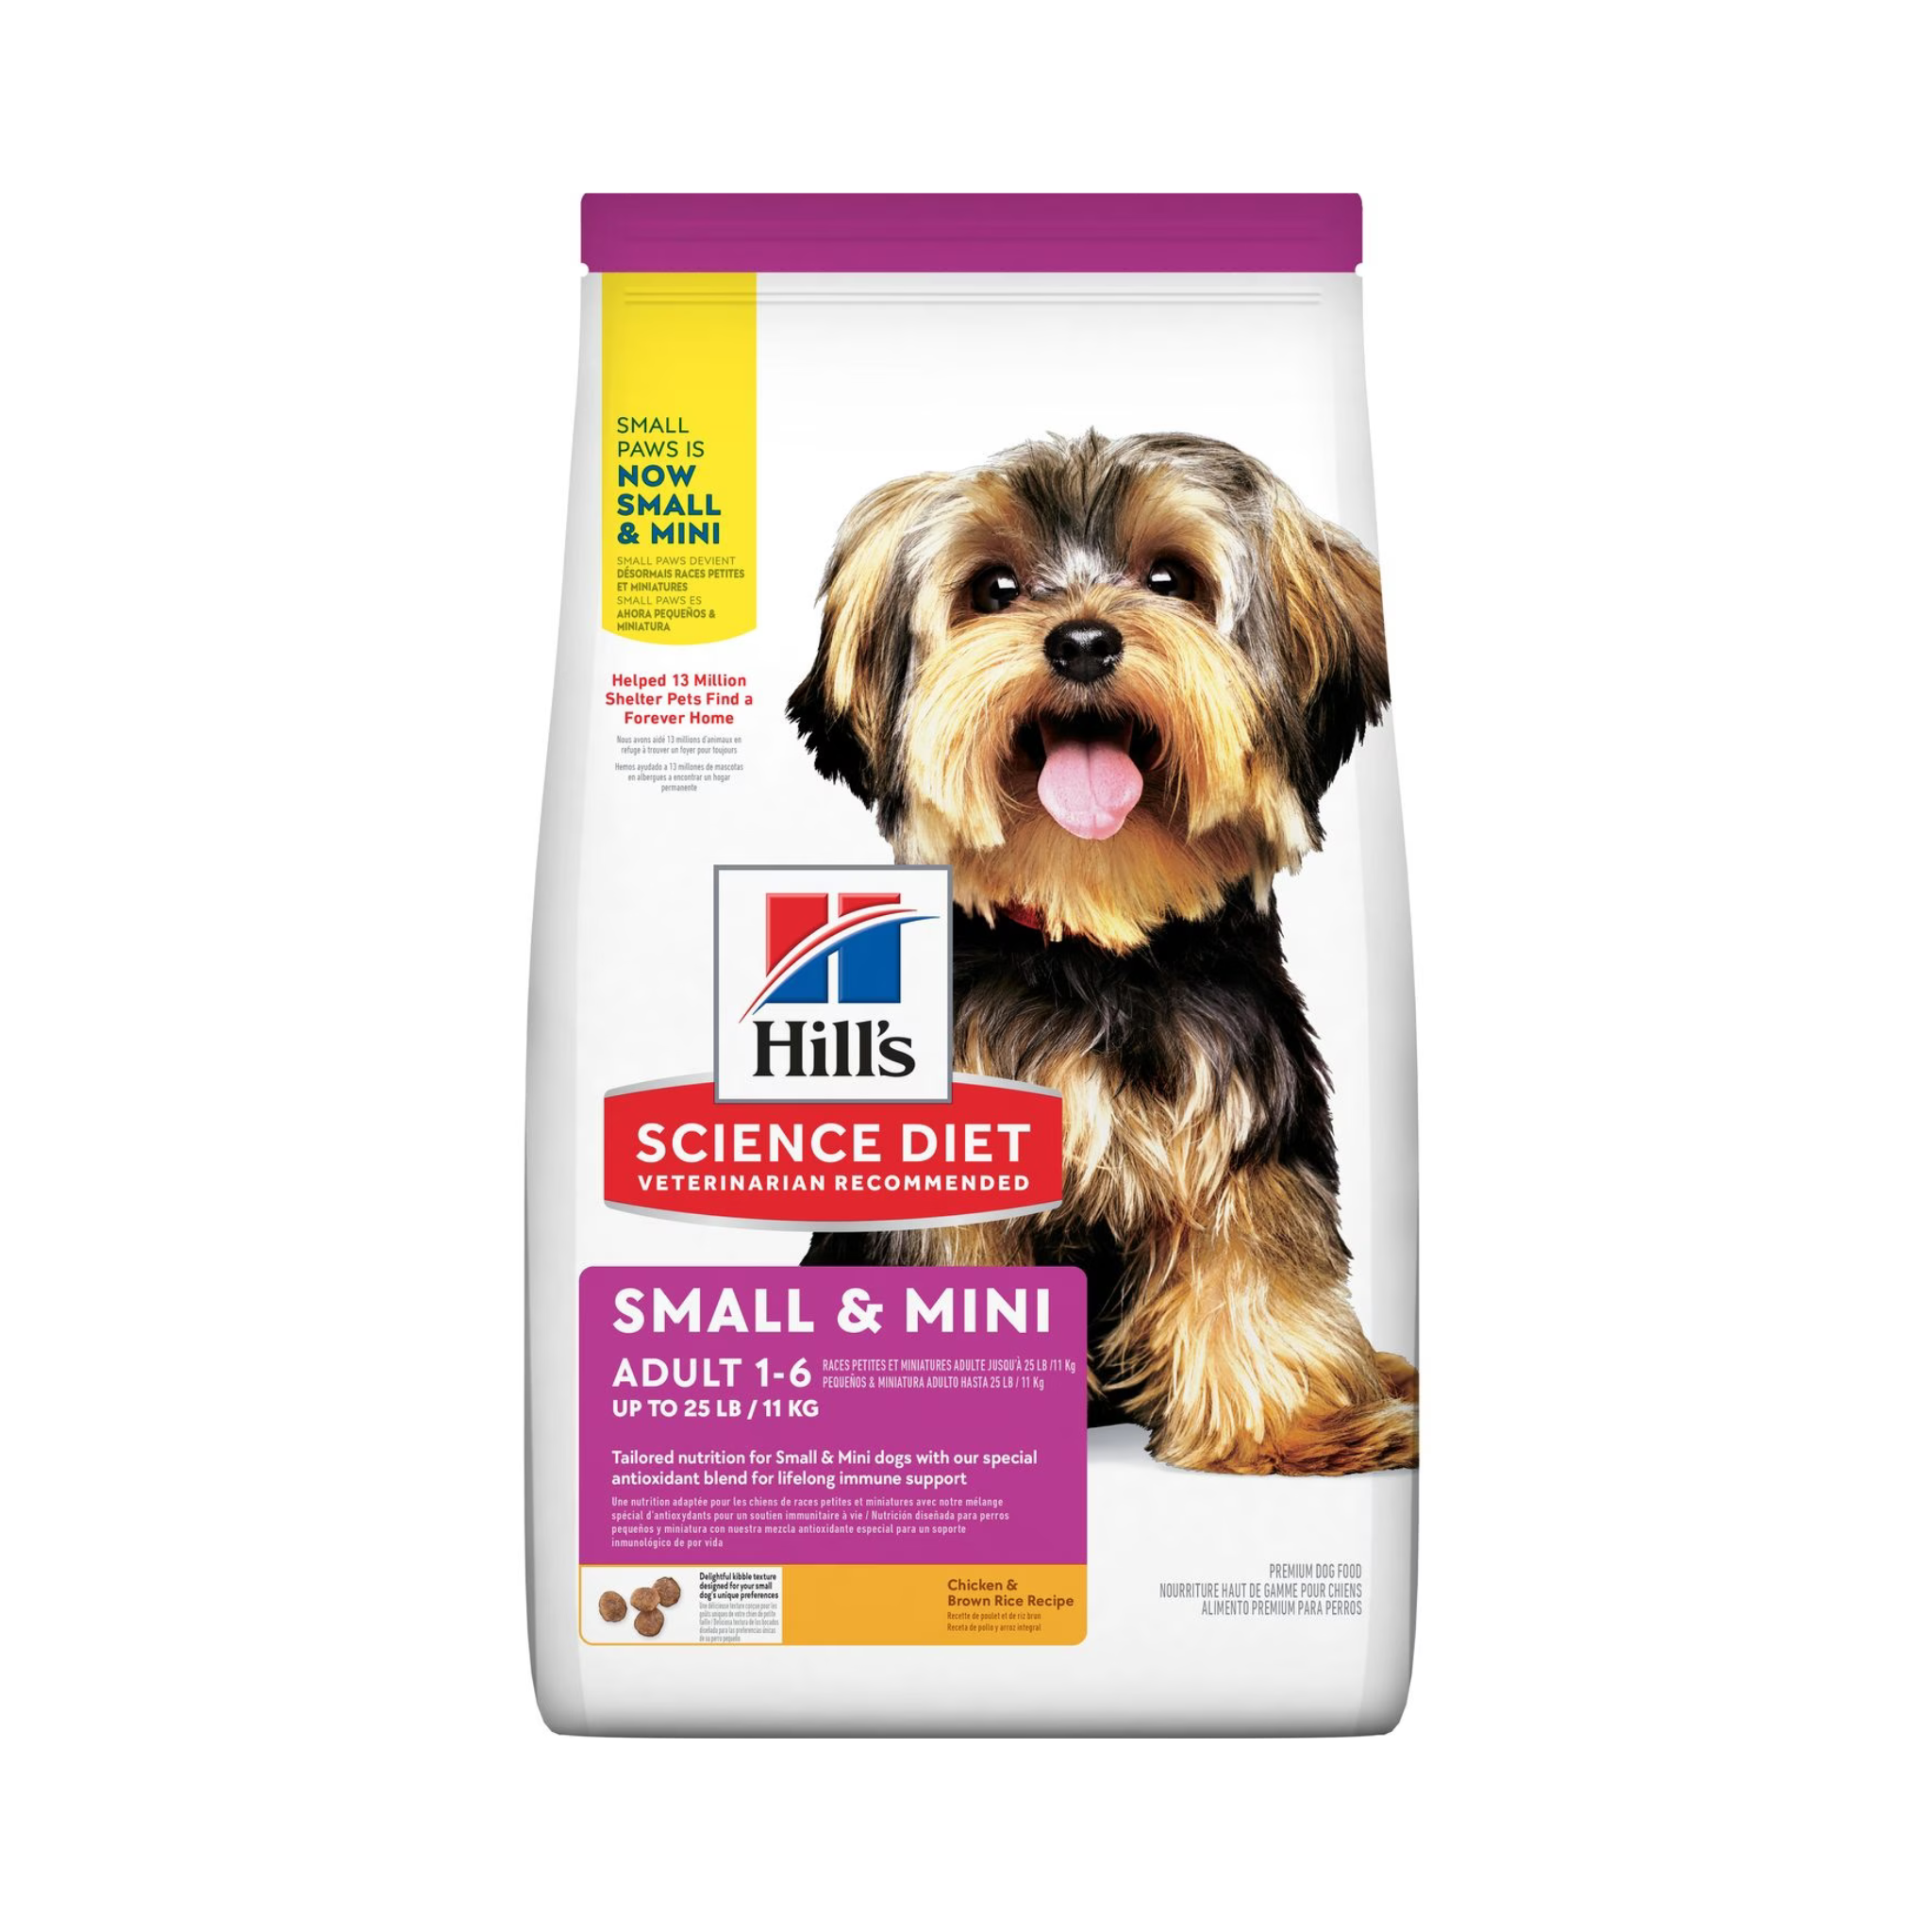 Hill's Science Diet Chicken & Brown Rice Adult 1-6 Small & Mini Dry Dog Food